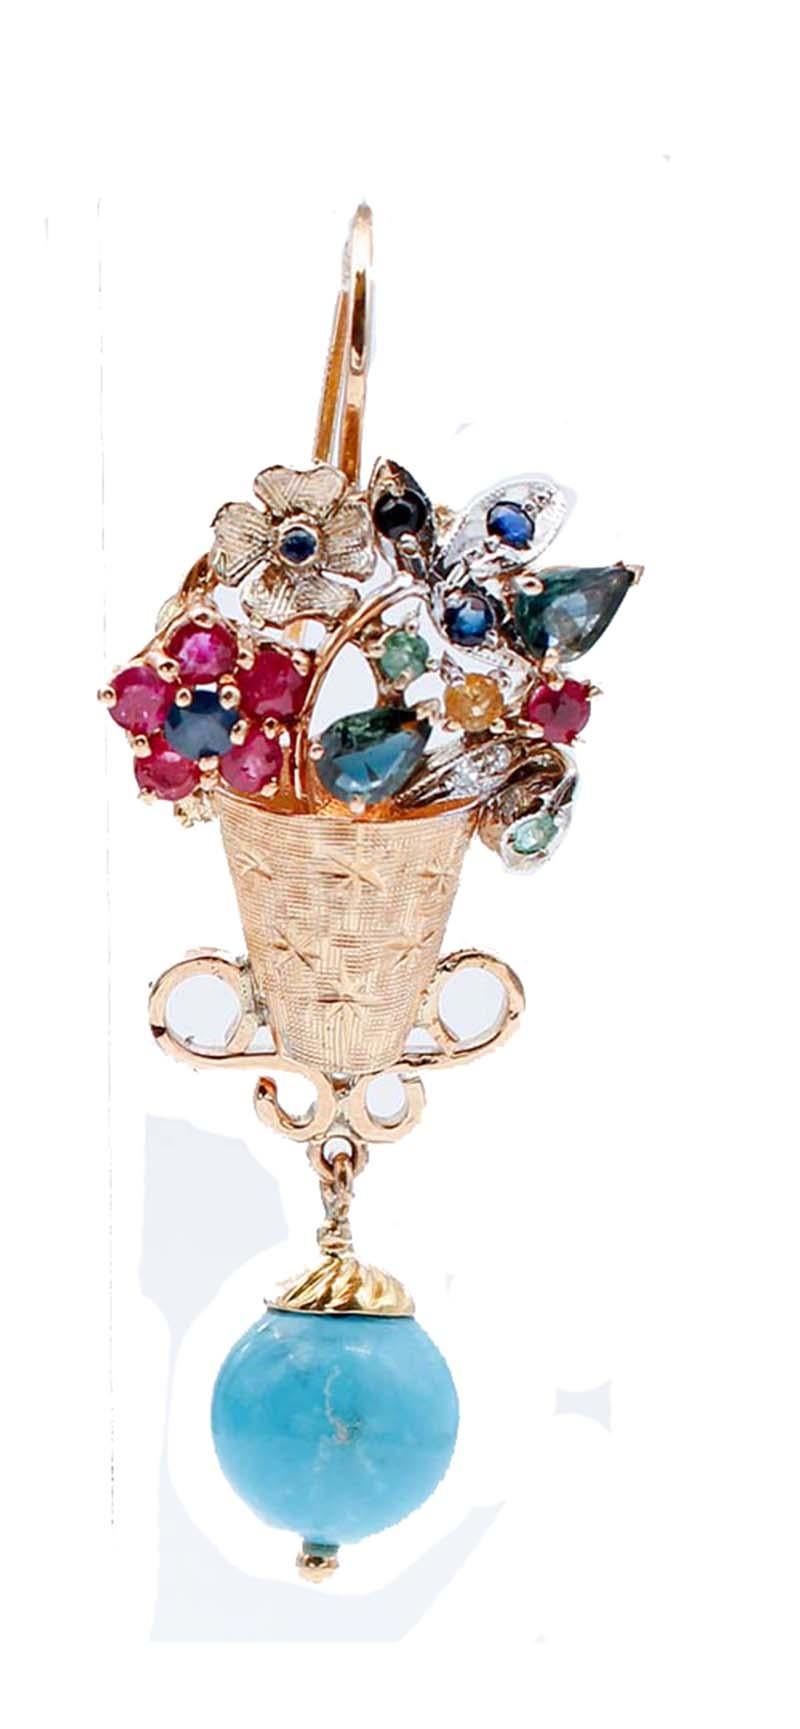 SHIPPING POLICY: 
No additional costs will be added to this order.
Shipping costs will be totally covered by the seller (customs duties included). 

Fantastic dangle  basket -shape earrings in 14 karat rose and white gold structure mounted with gold